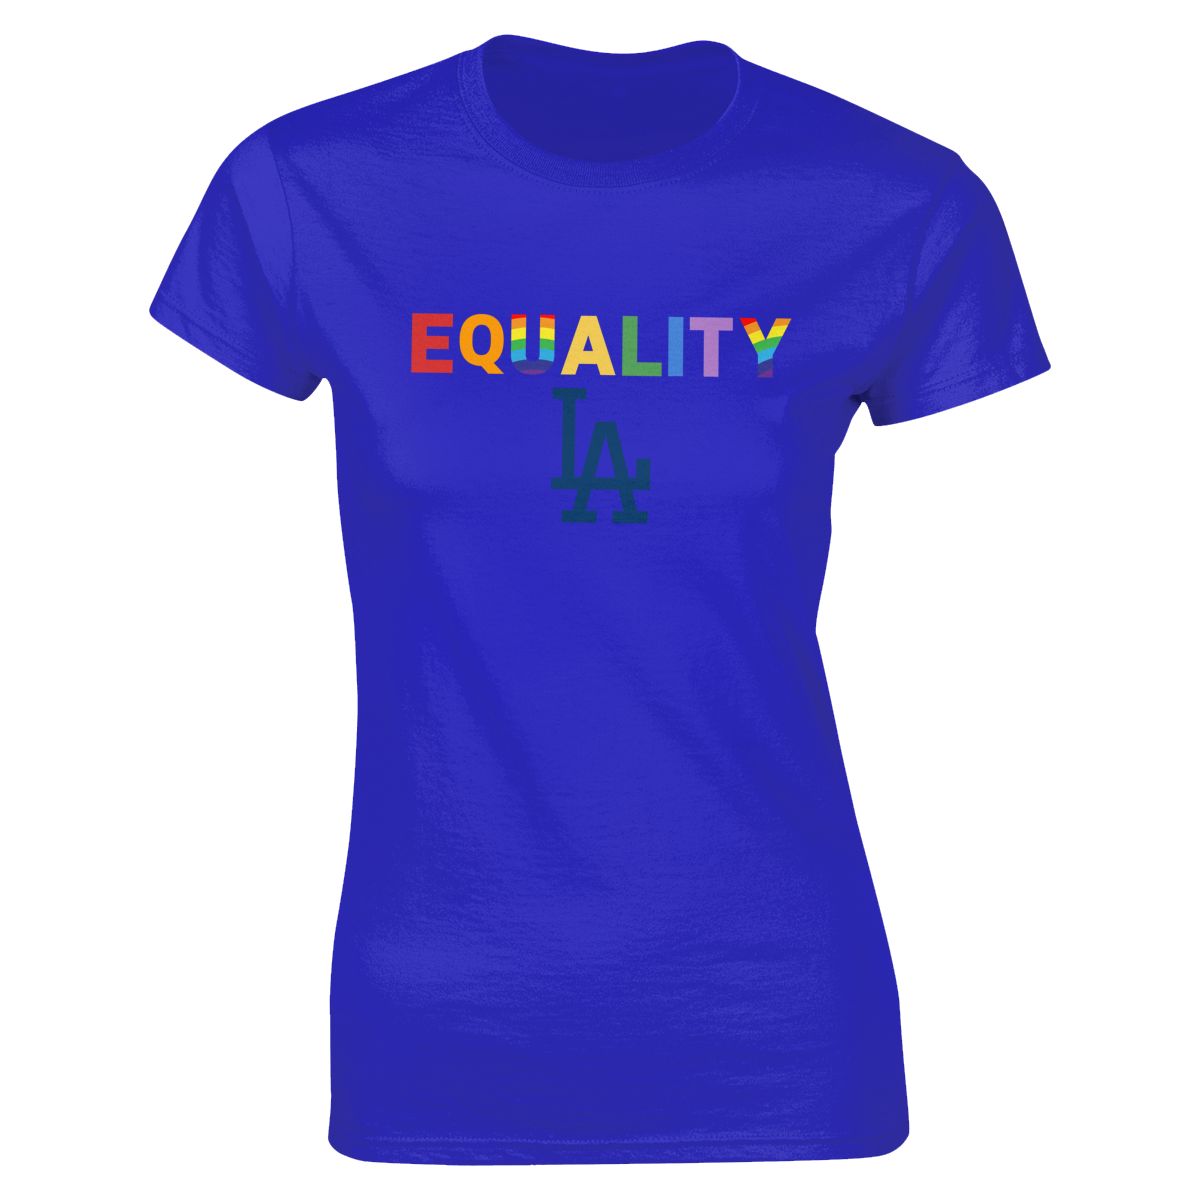 Los Angeles Dodgers Rainbow Equality Pride Women's Classic-Fit T-Shirt